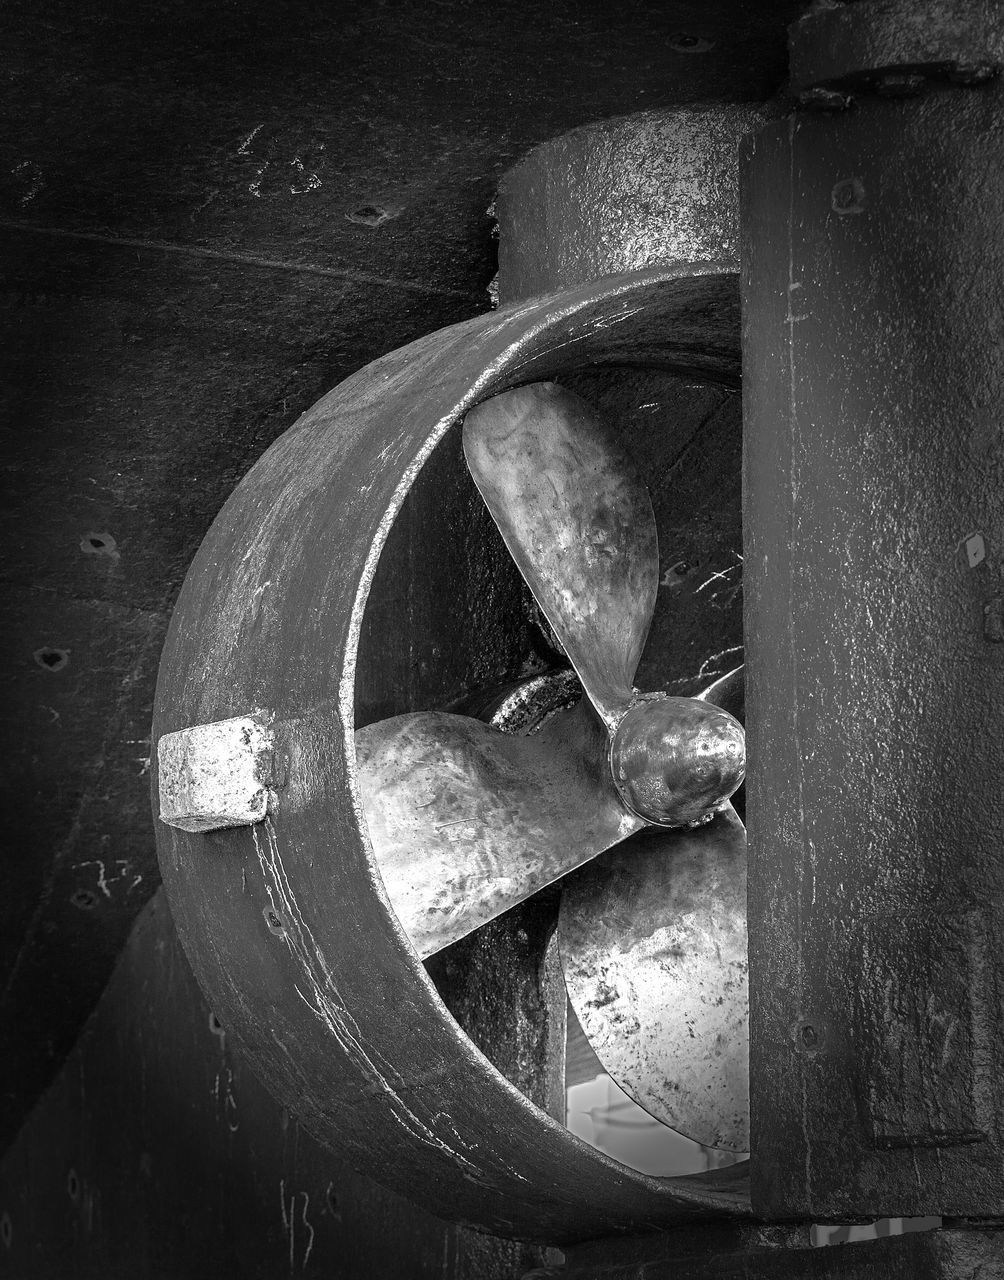 black, darkness, black and white, monochrome, monochrome photography, white, light, no people, iron, metal, indoors, close-up, old, wheel, still life photography, wood